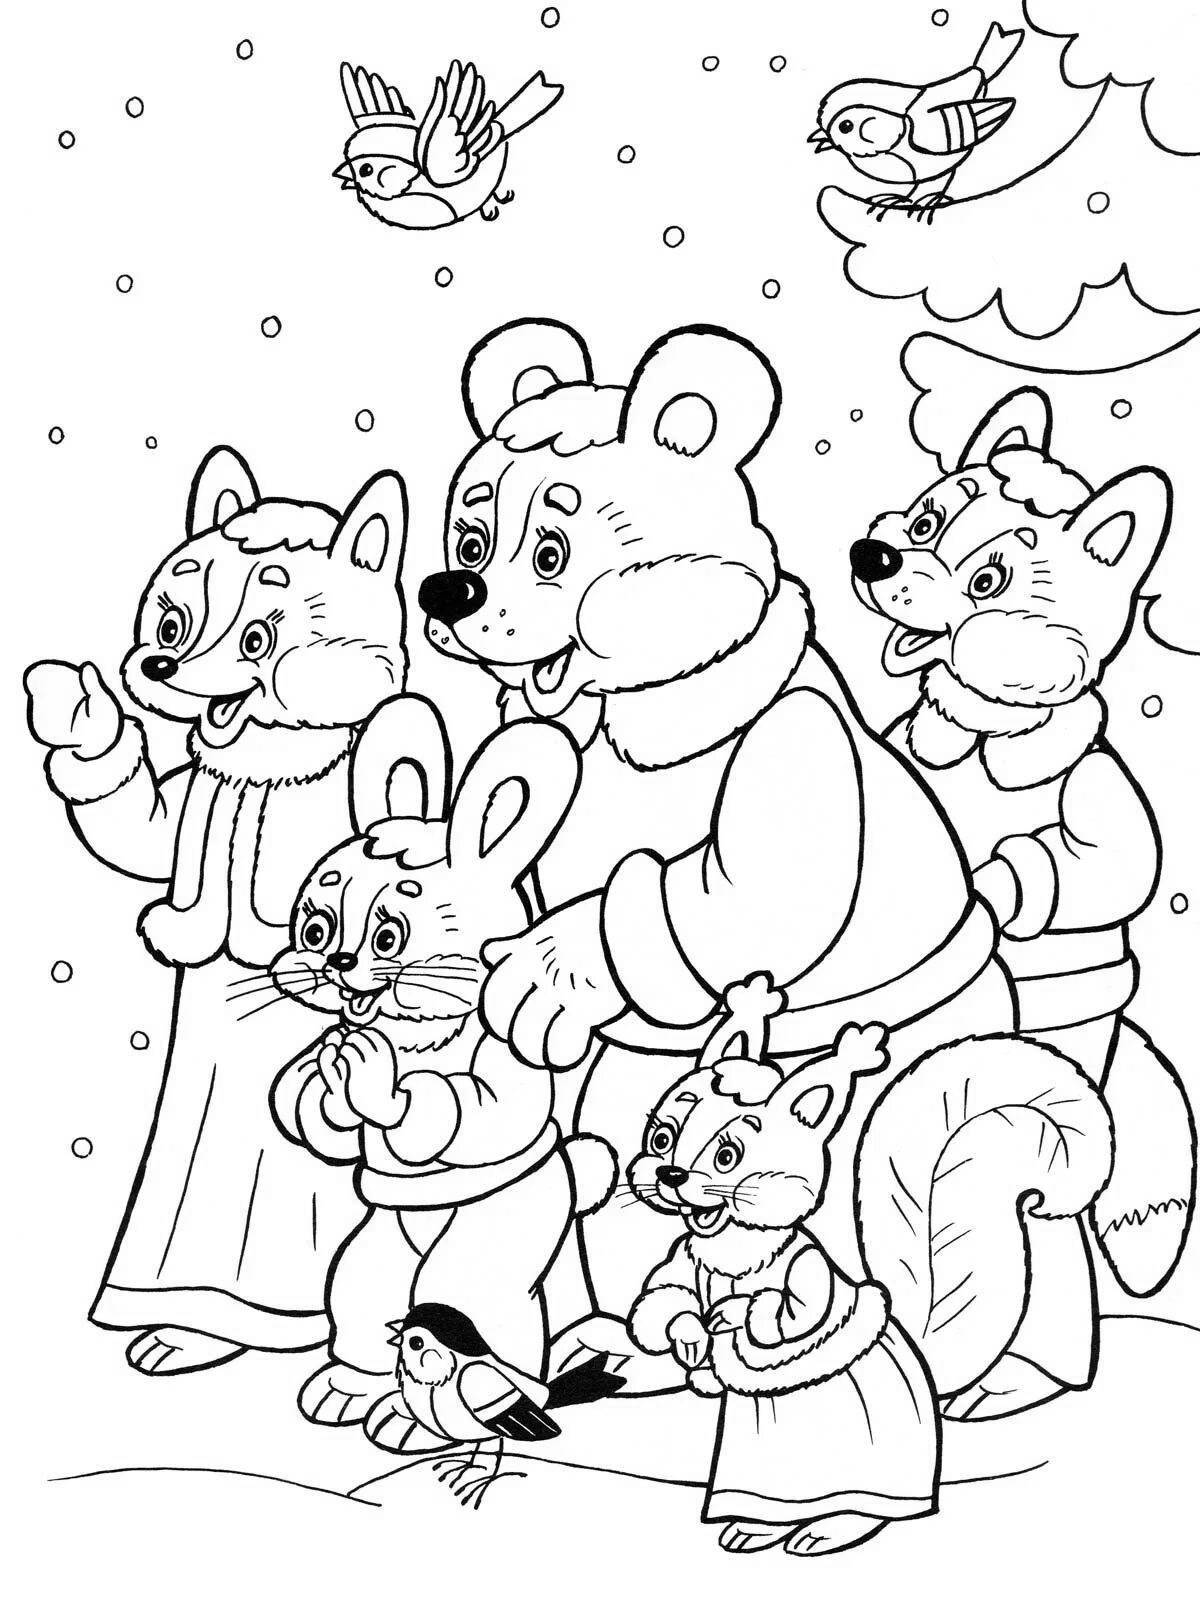 Playful winter animal coloring for kids